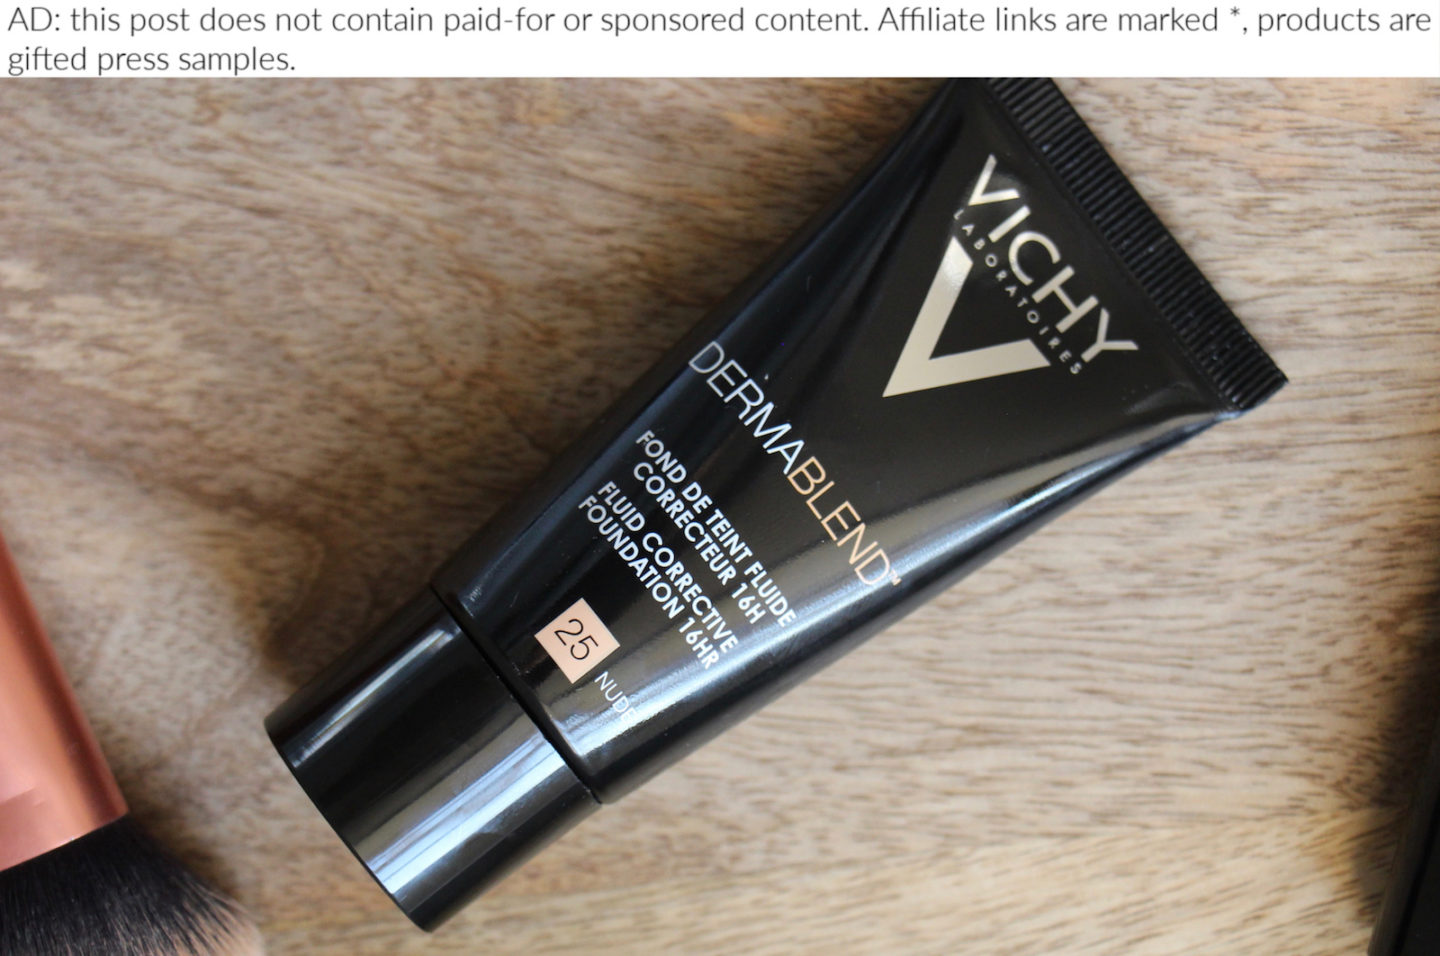 Foundation Review: Vichy Dermablend